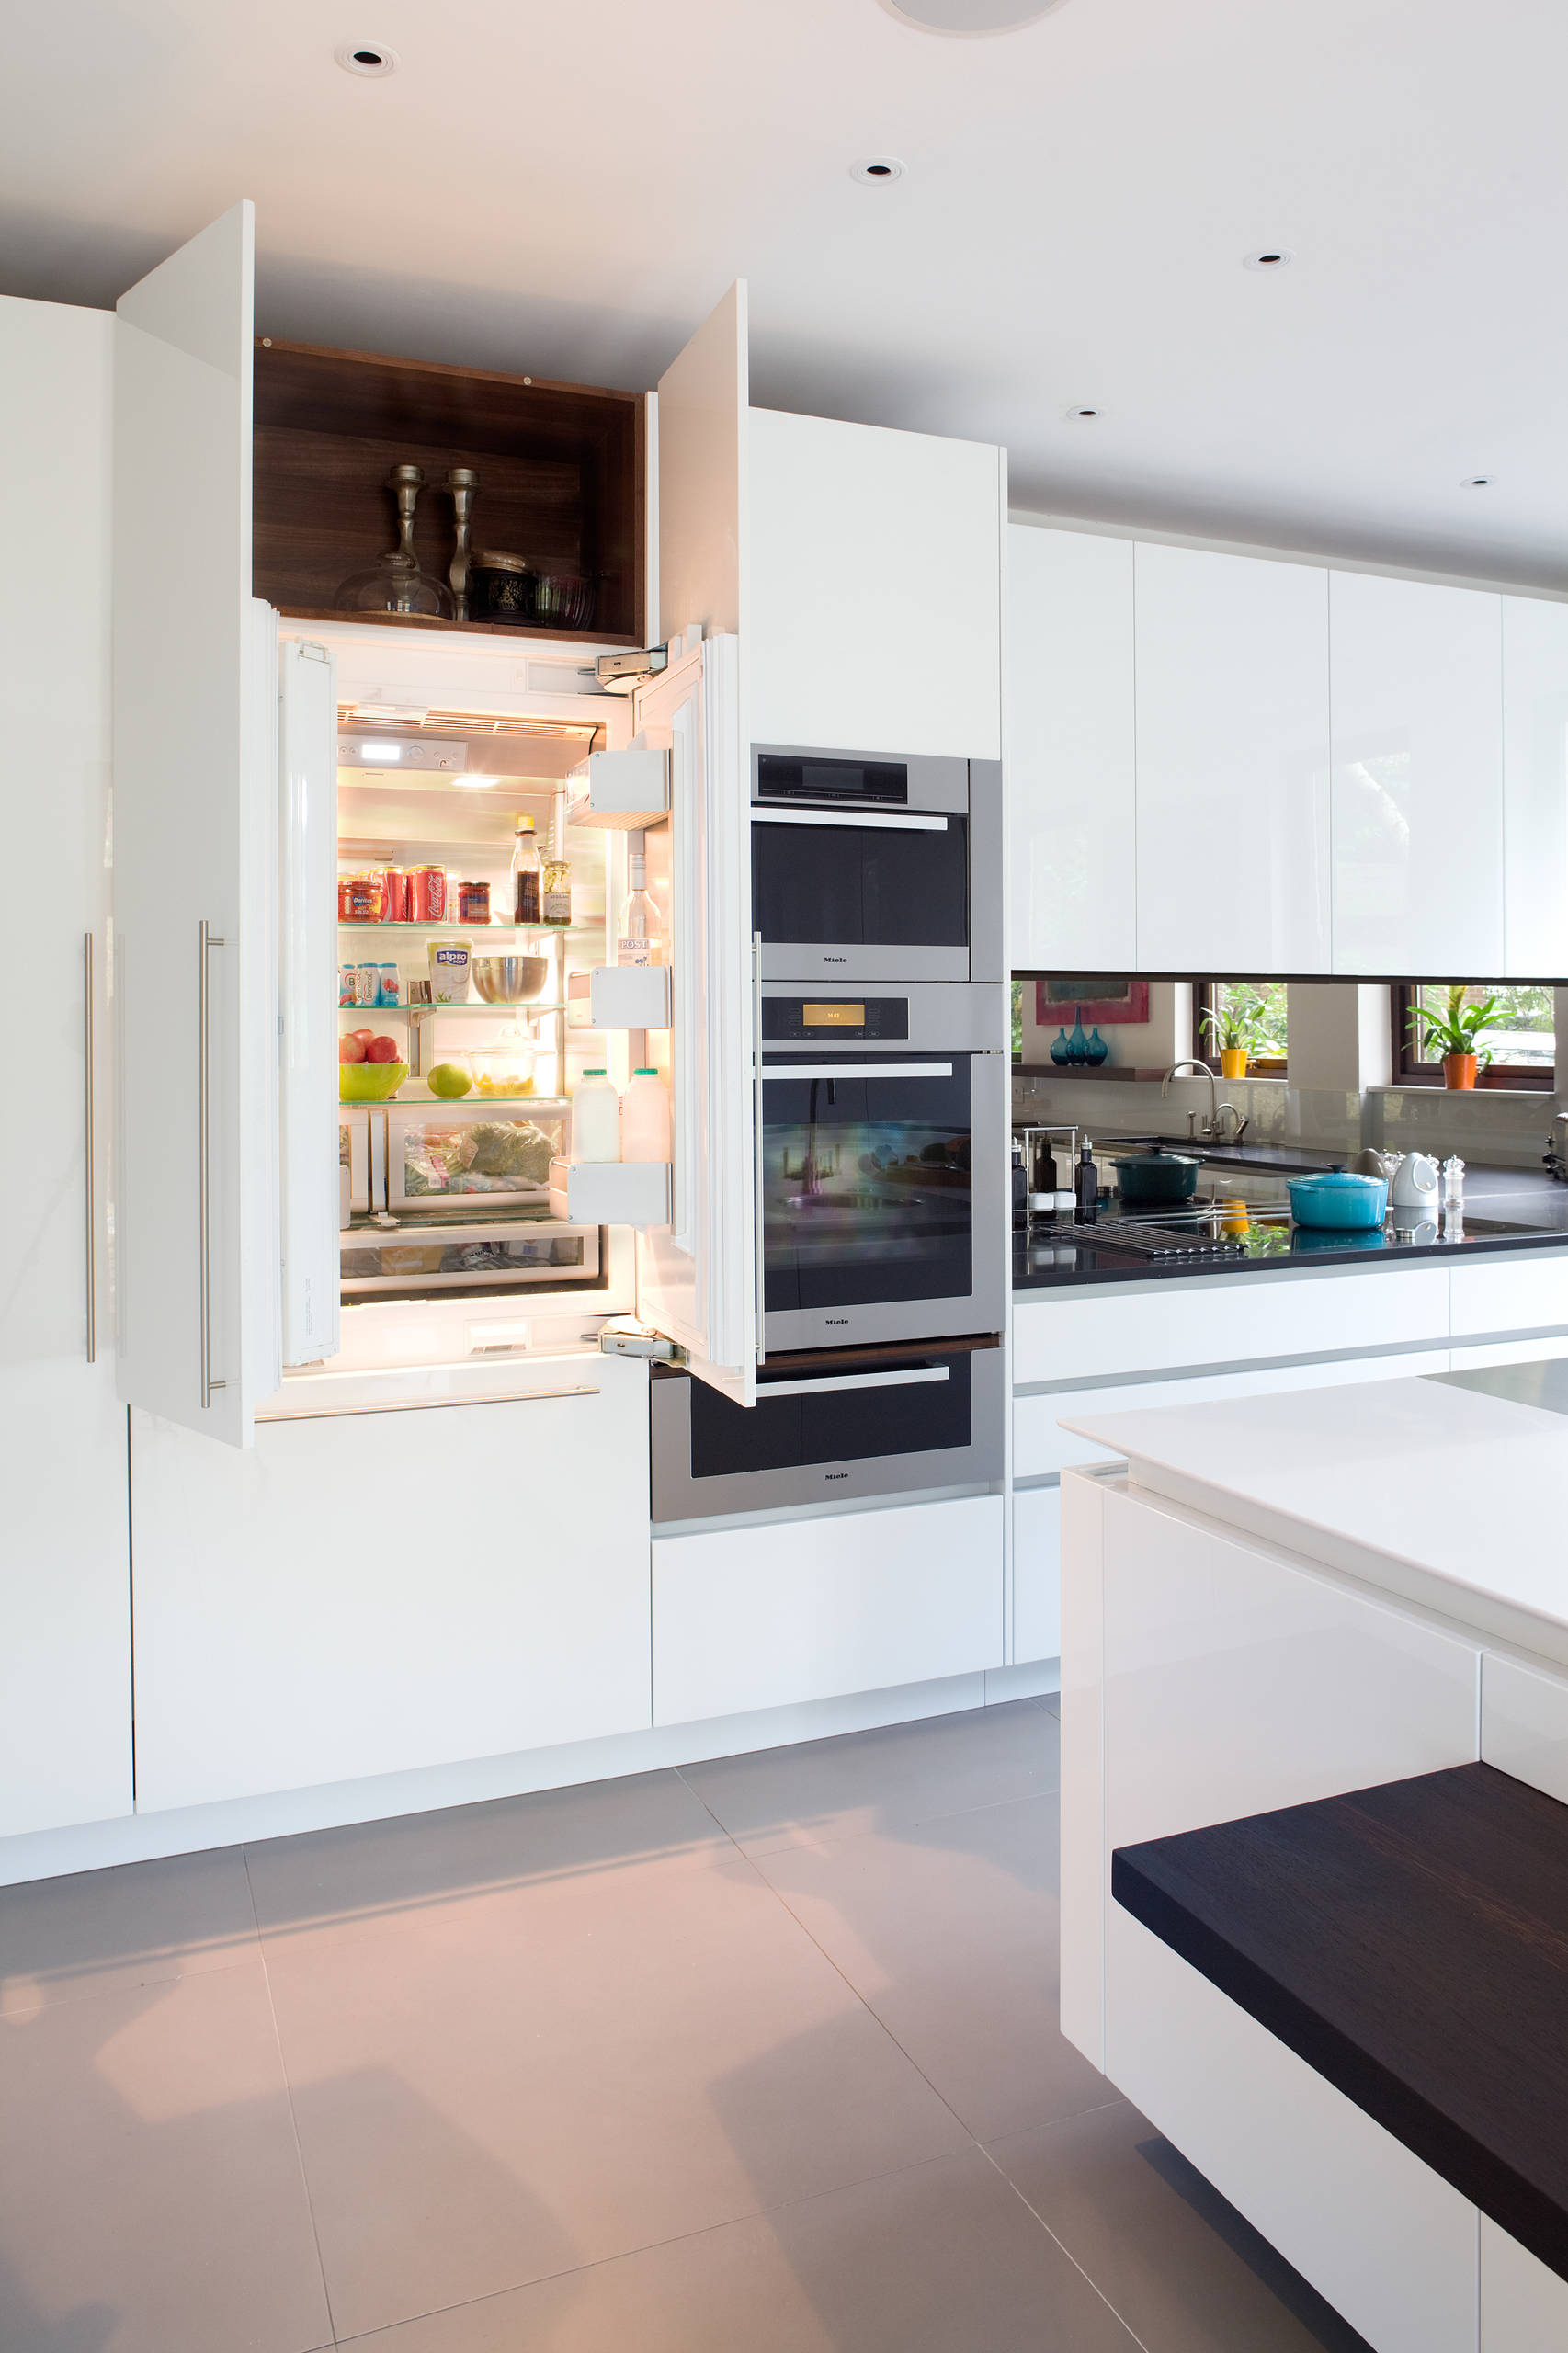 How to Choose the Right Fridge for Your Kitchen and Household | Houzz UK